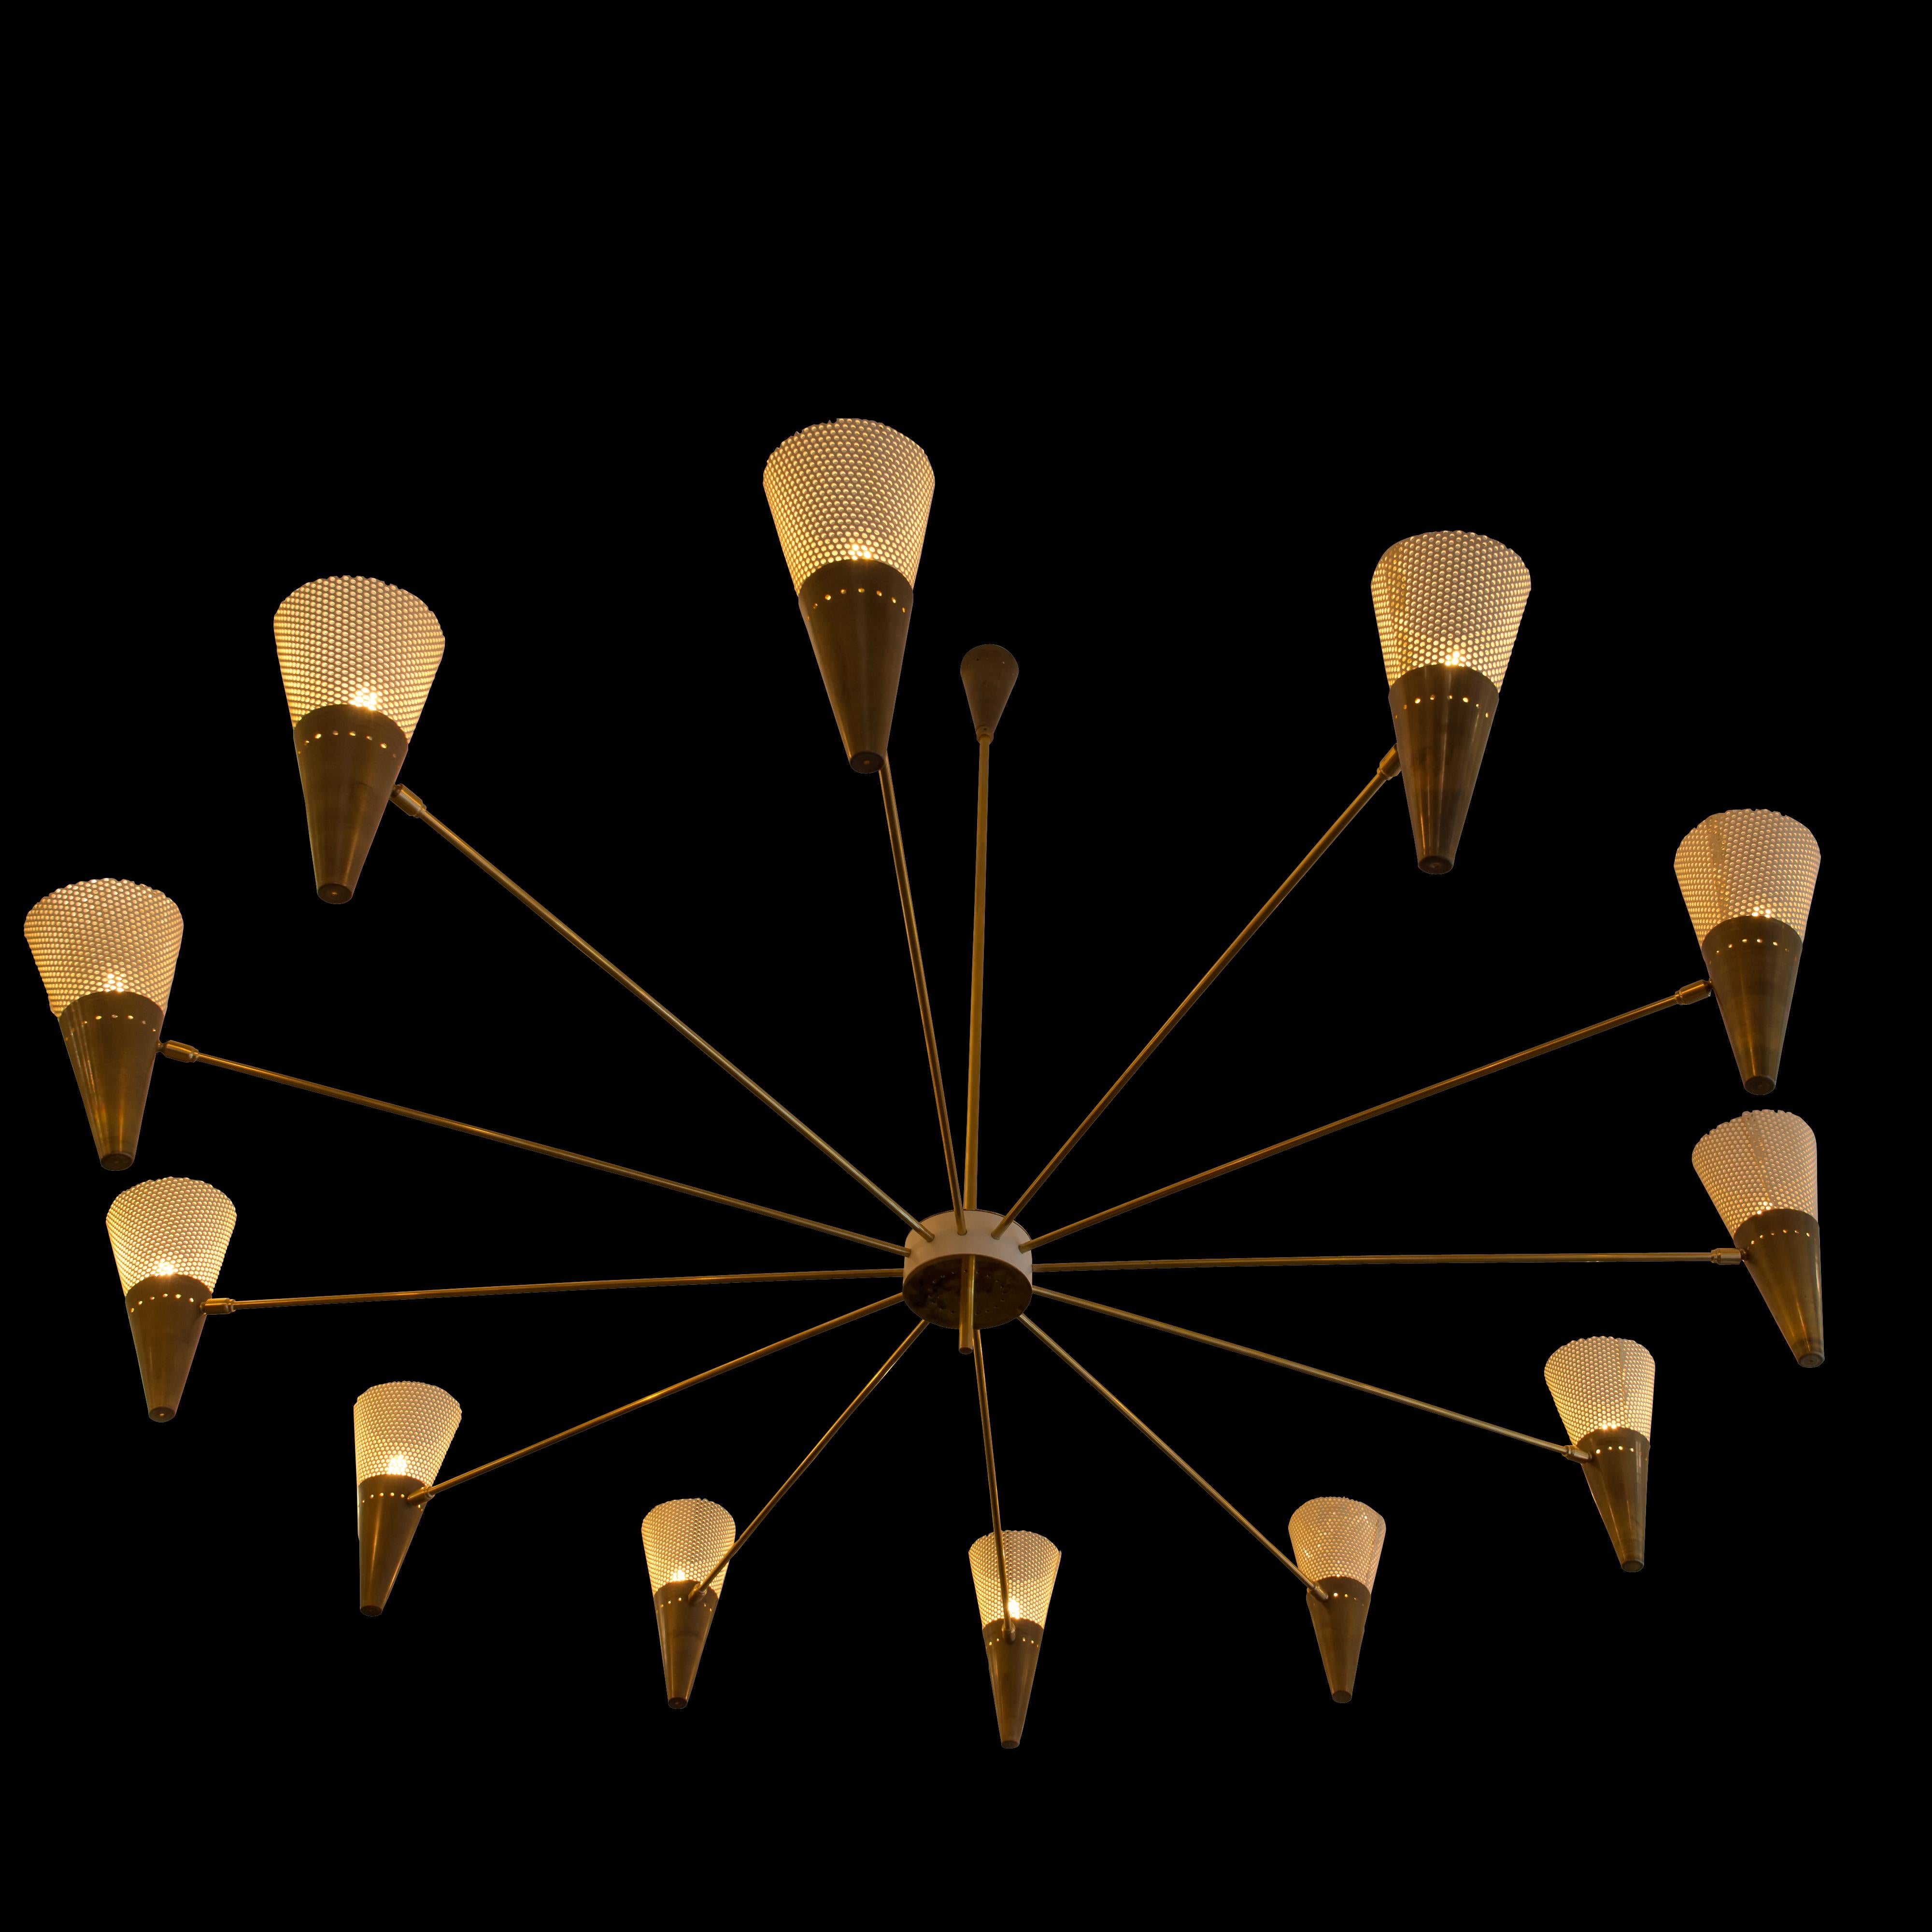 Contemporary Modern Bespoke Ceiling Light Brass and Ivory Color Shades by Diego Mardegan